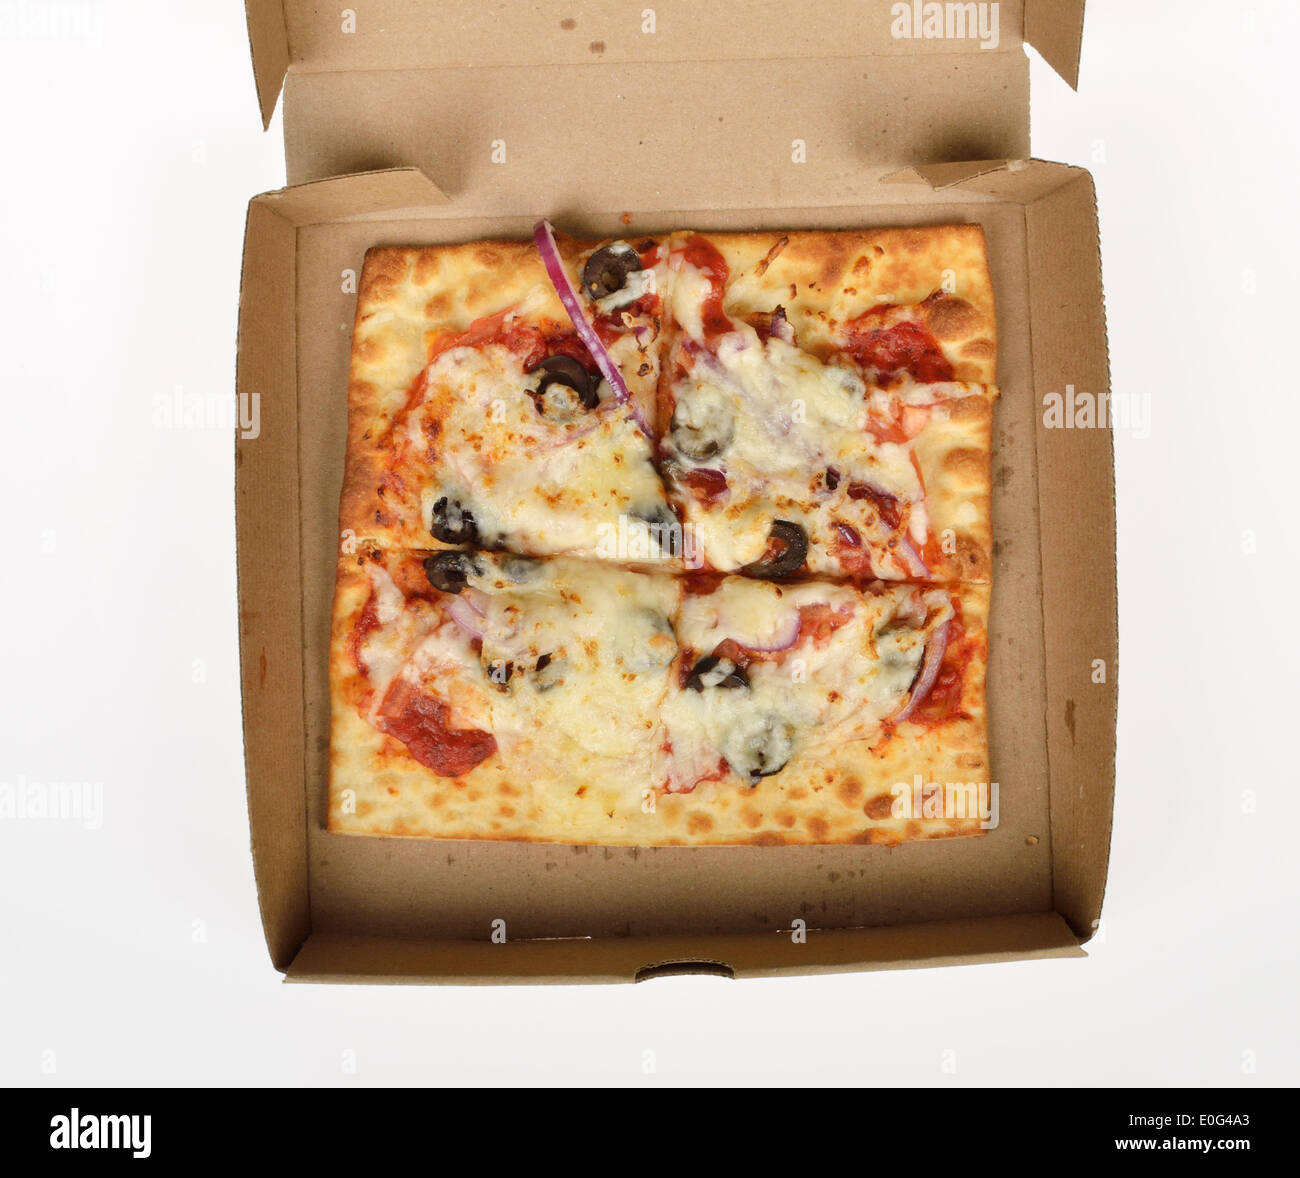 Subway fast food flatizza cheese square pizza in box packaging on white background, USA. Stock Photo